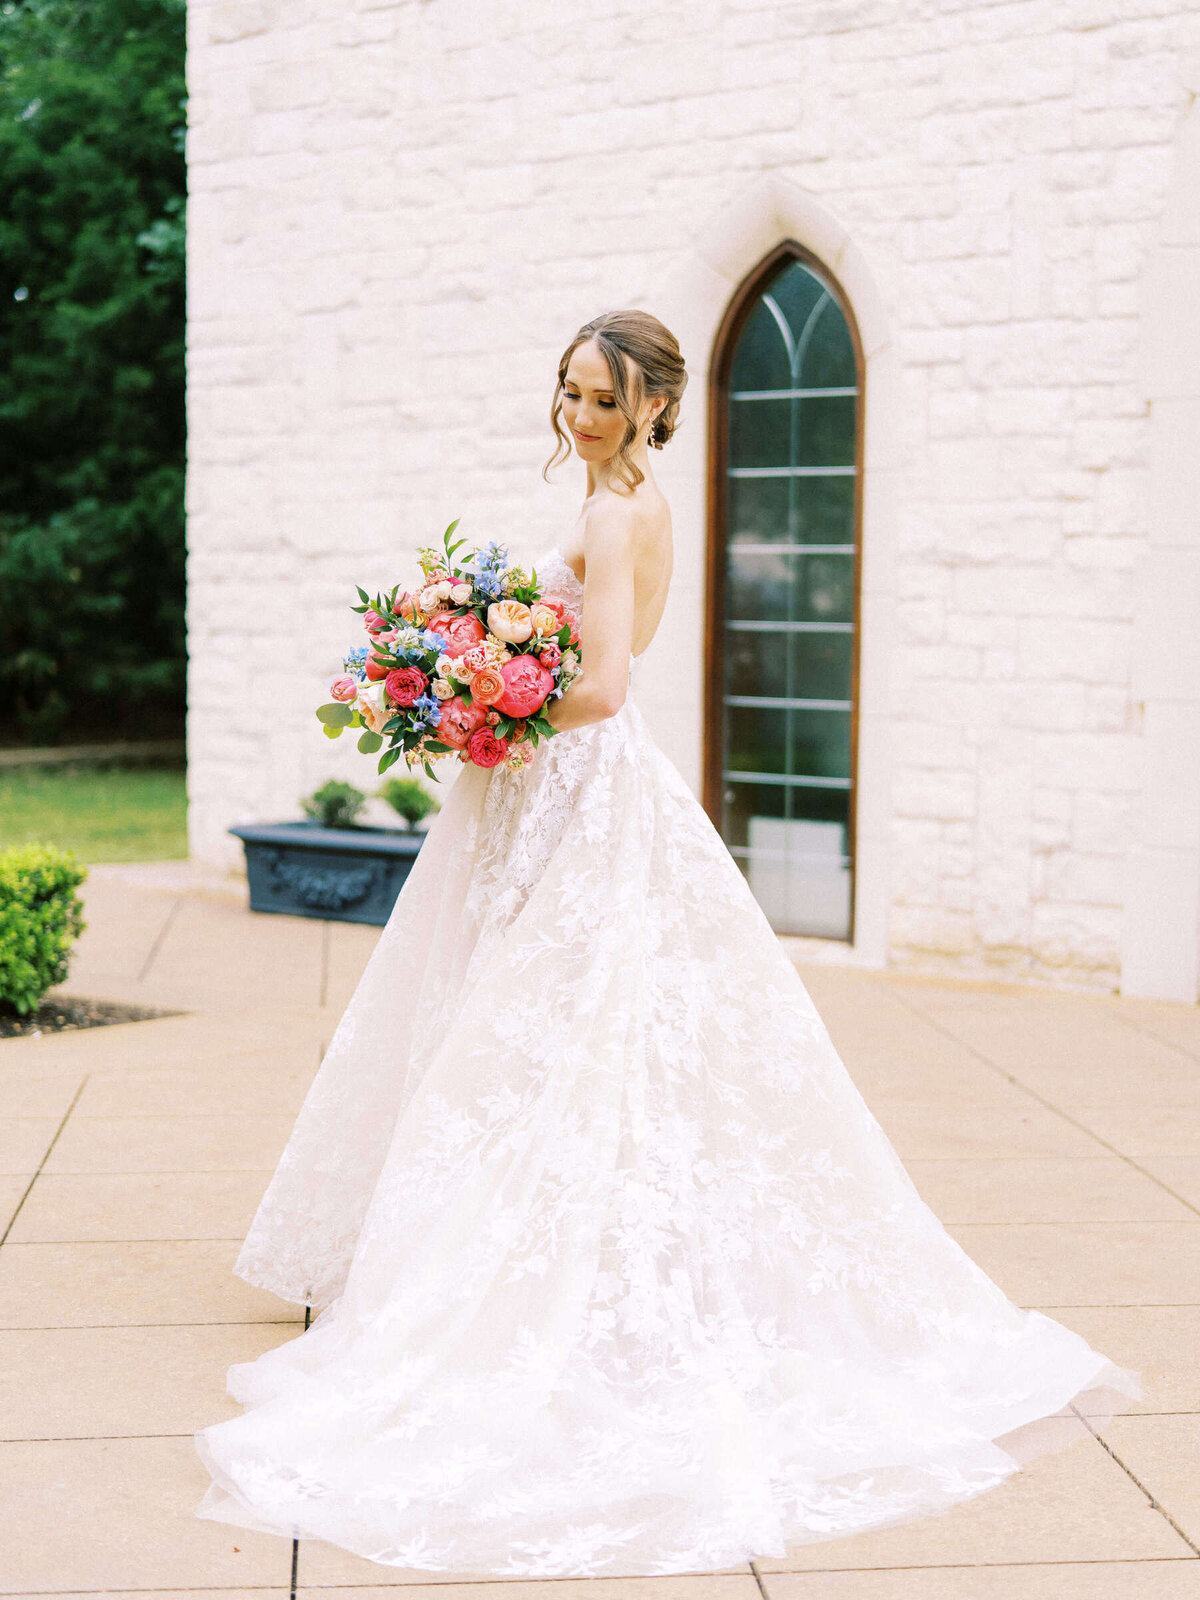 Timeless bride stands outside wedding chapel in Monique Lhuillier wedding dress with colorful bridal bouquet